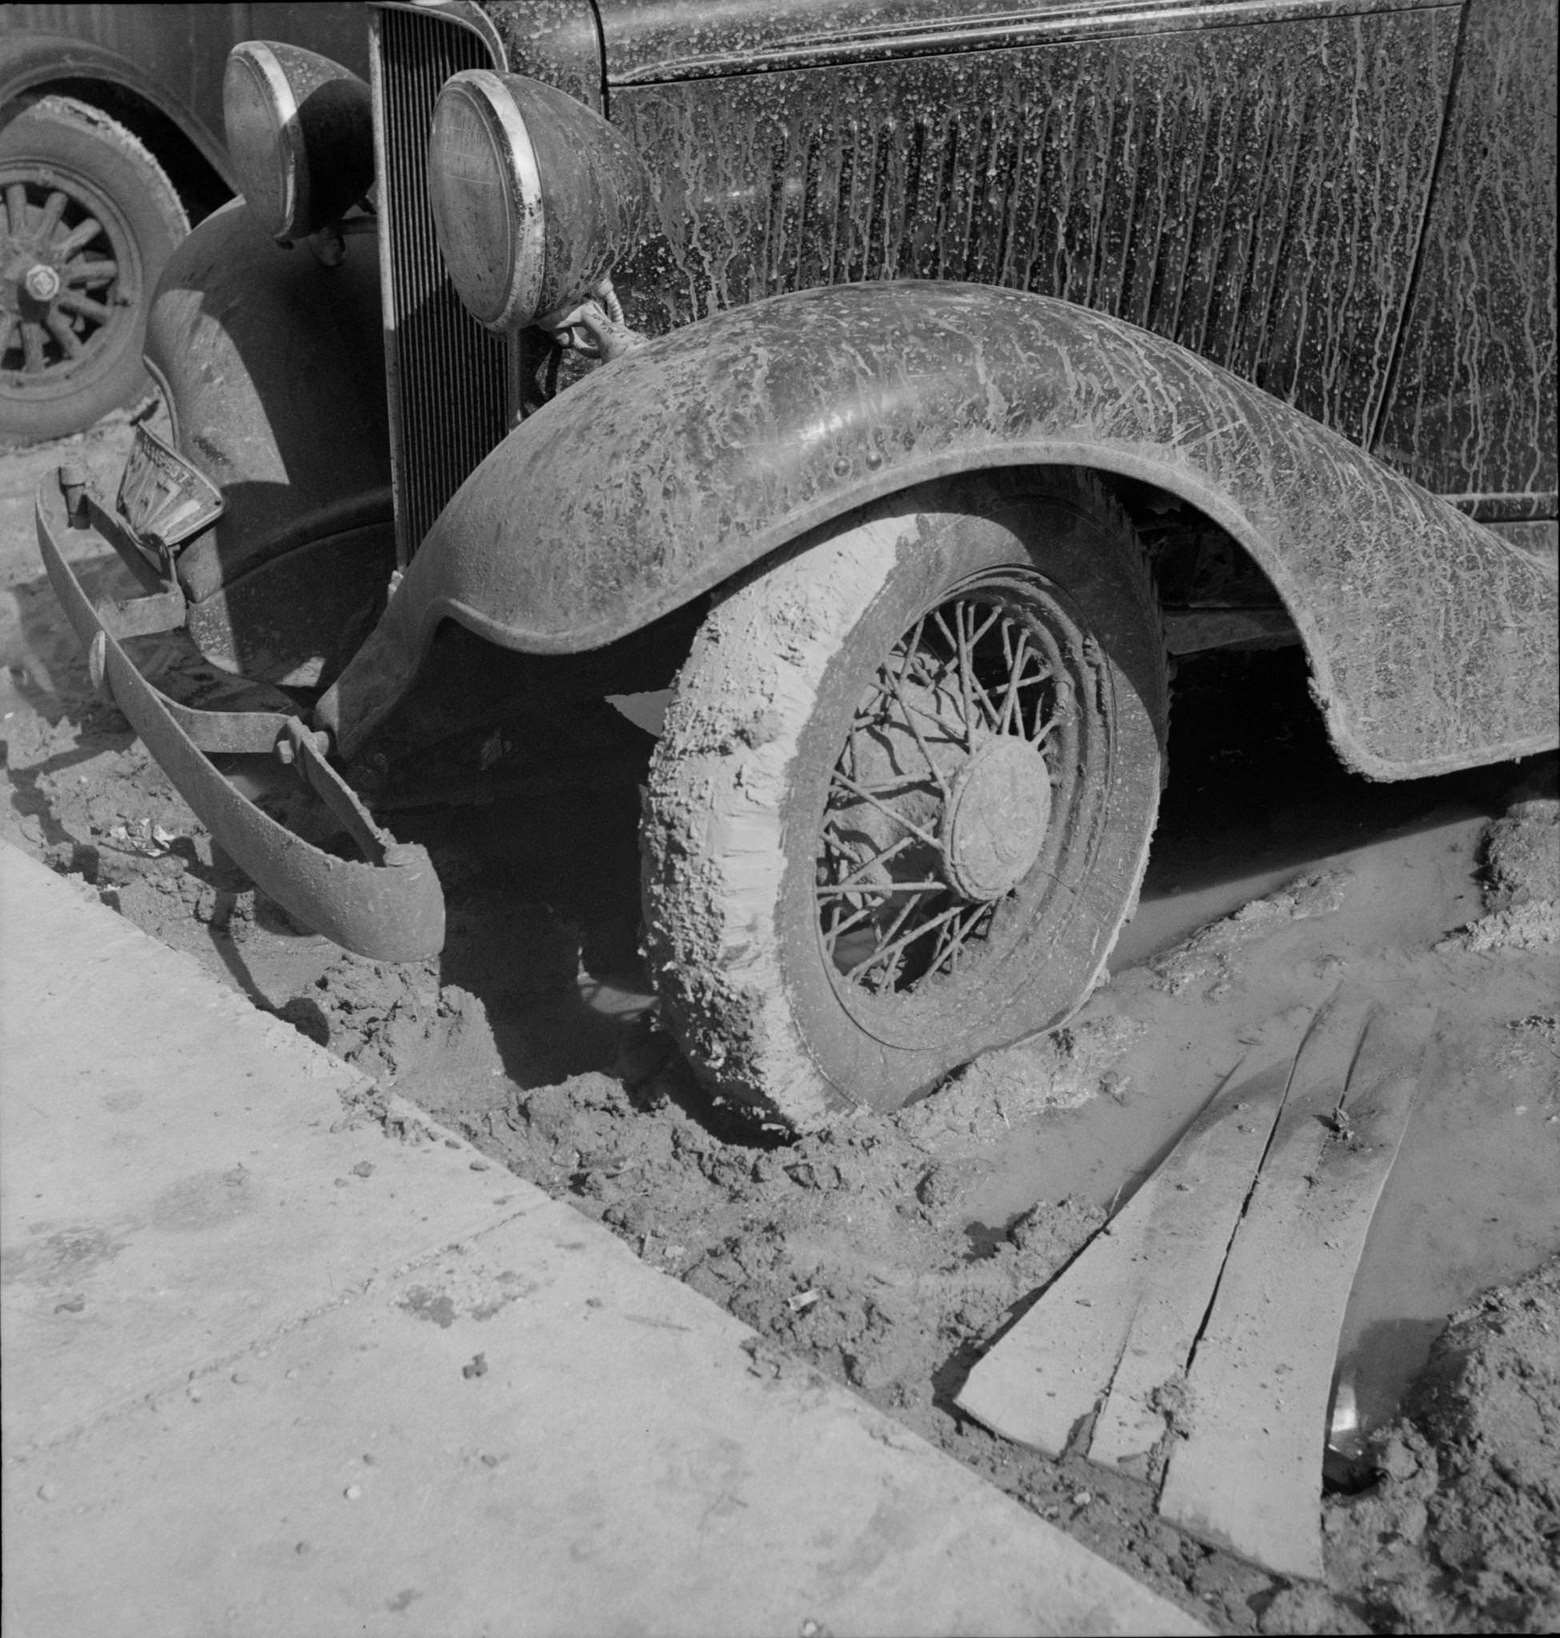 This year (1937) there are floods and heavy rain in the Dust Bowl. Auton, Texas, 1934